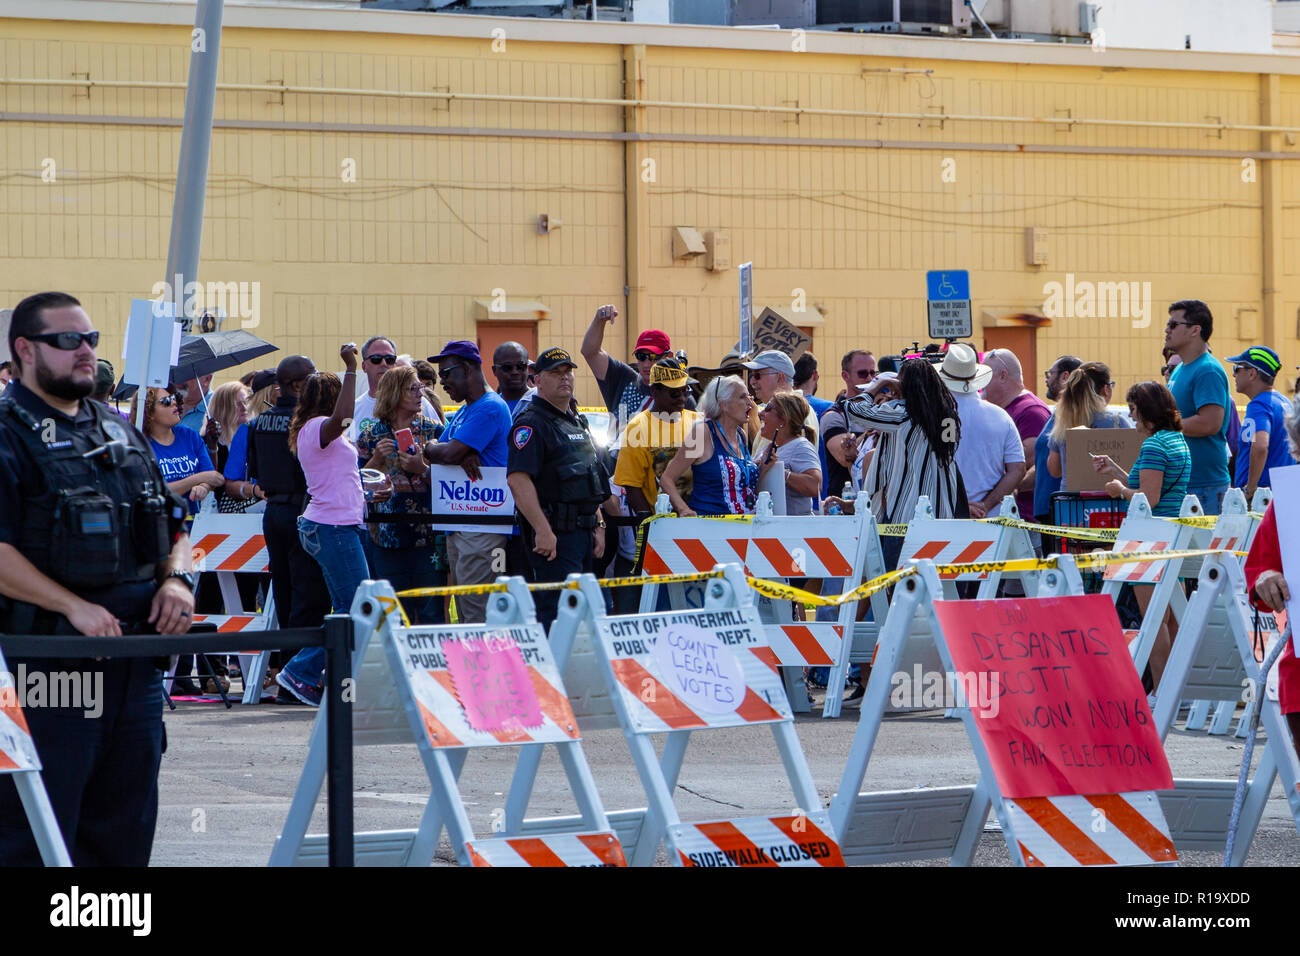 Lauderhill, Florida, USA. 10th Nov, 2018. Vote counting protest in front of Broward County Supervisor of Elections Brenda Snipes' office. The protest began over controversy surrounding the results of the 2018 midterm elections for Florida Governor and Florida Senator. Holly Guerrio/Alamy Live News Stock Photo